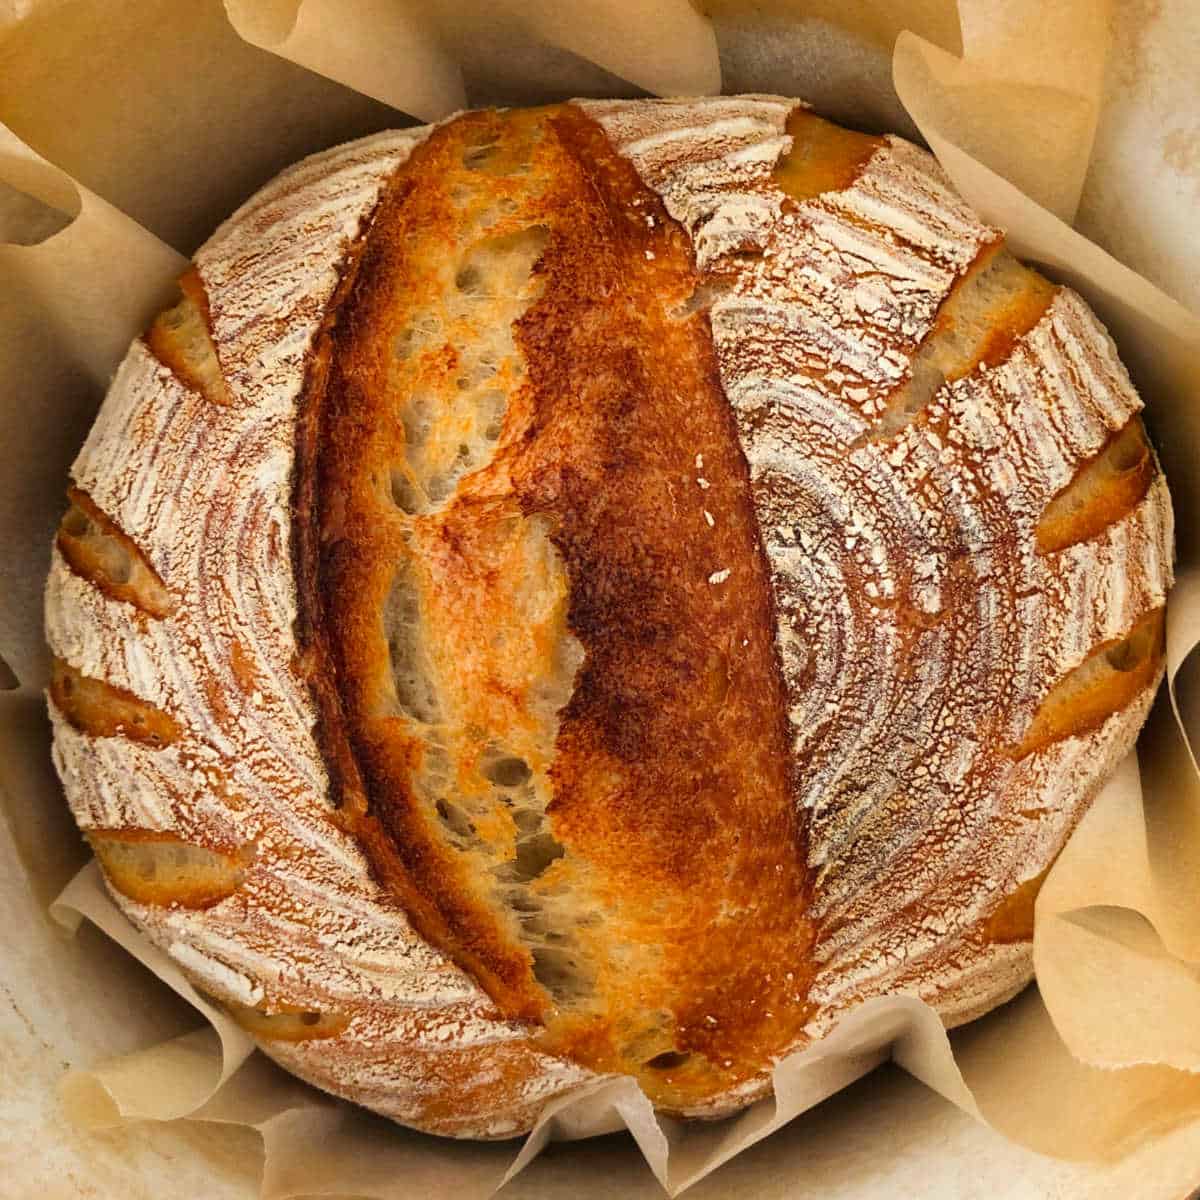 Perfectly baked sourdough bread inside a Dutch oven.